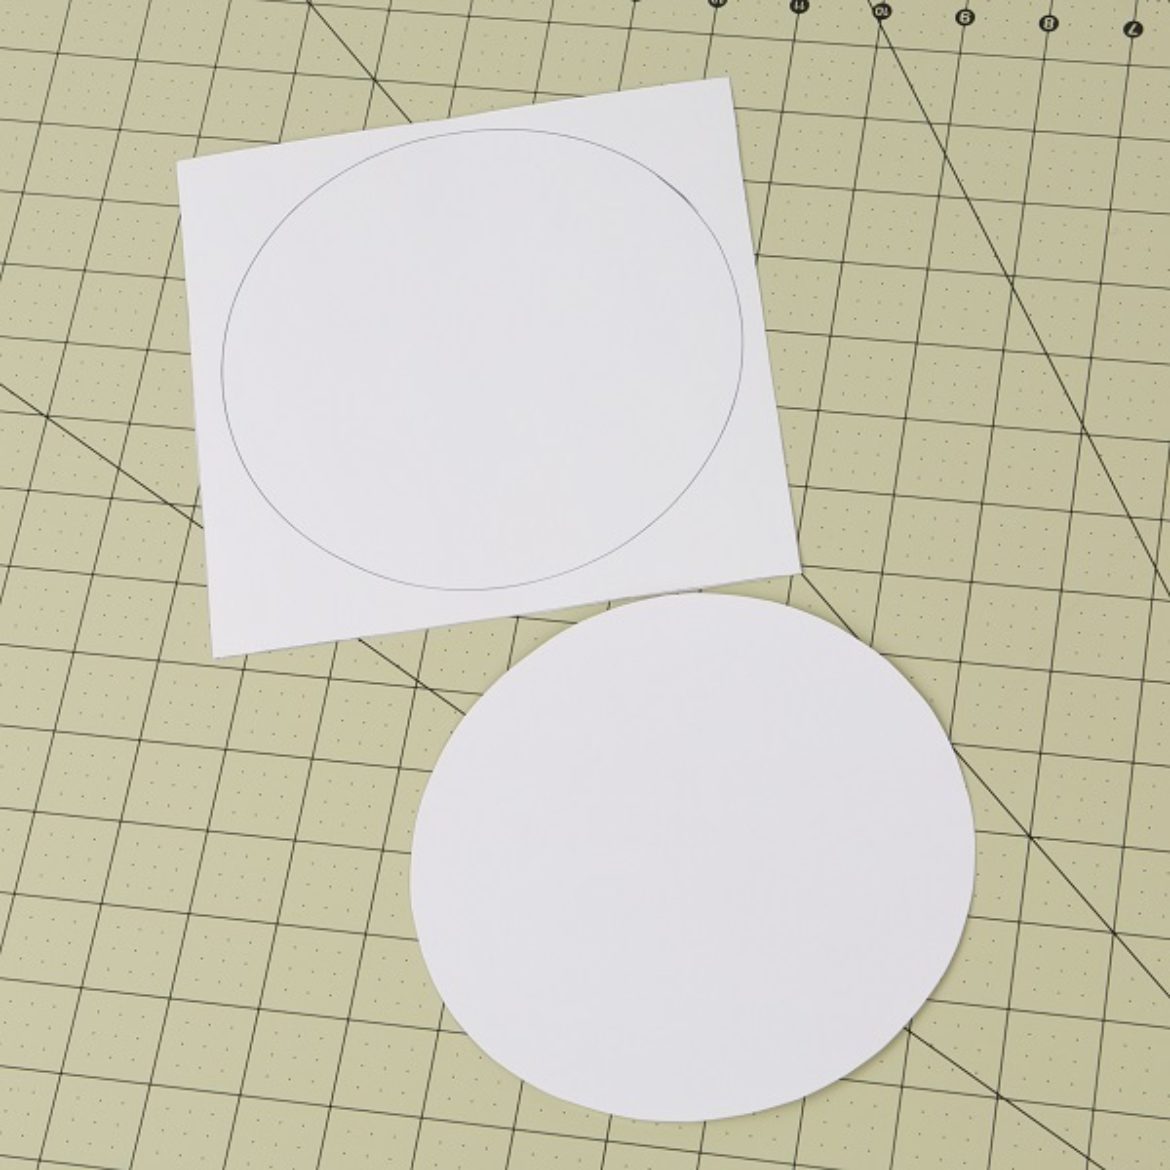 Two circles drawn and cut out of pieces of cardstock